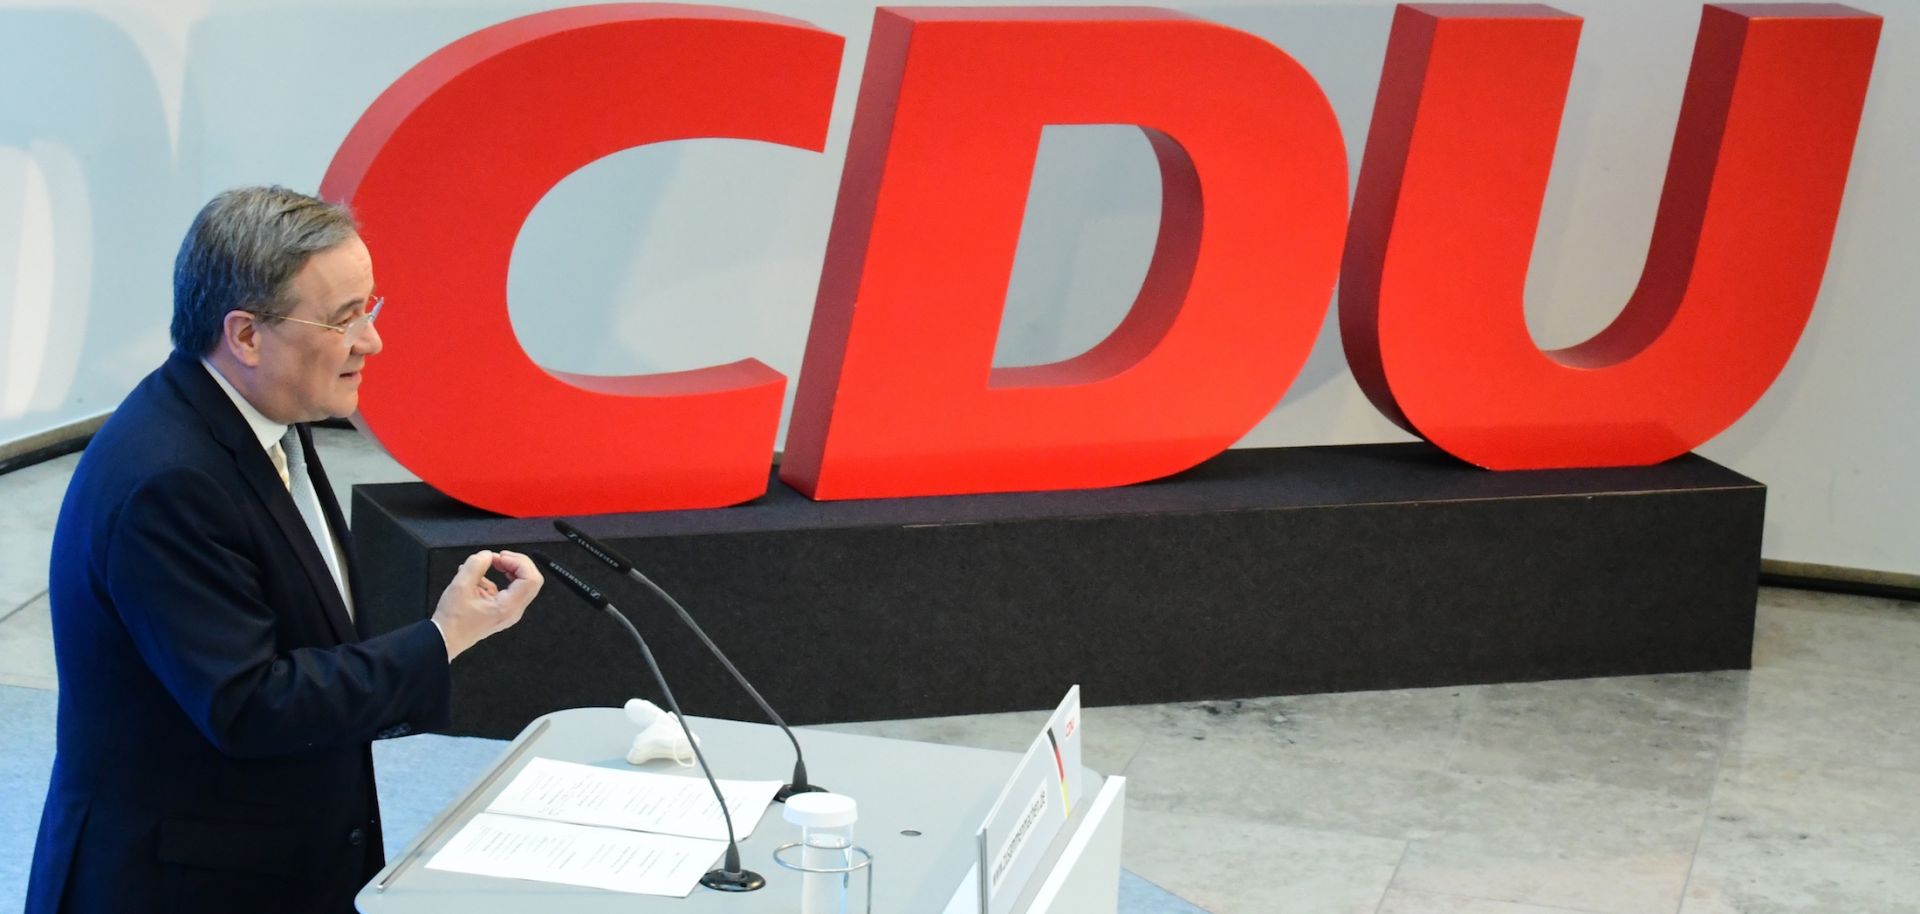 CDU party chairman Armin Laschet speaks on the occasion of the start of the participation campaign for the CDU's election program March 30, 2021, in Berlin.